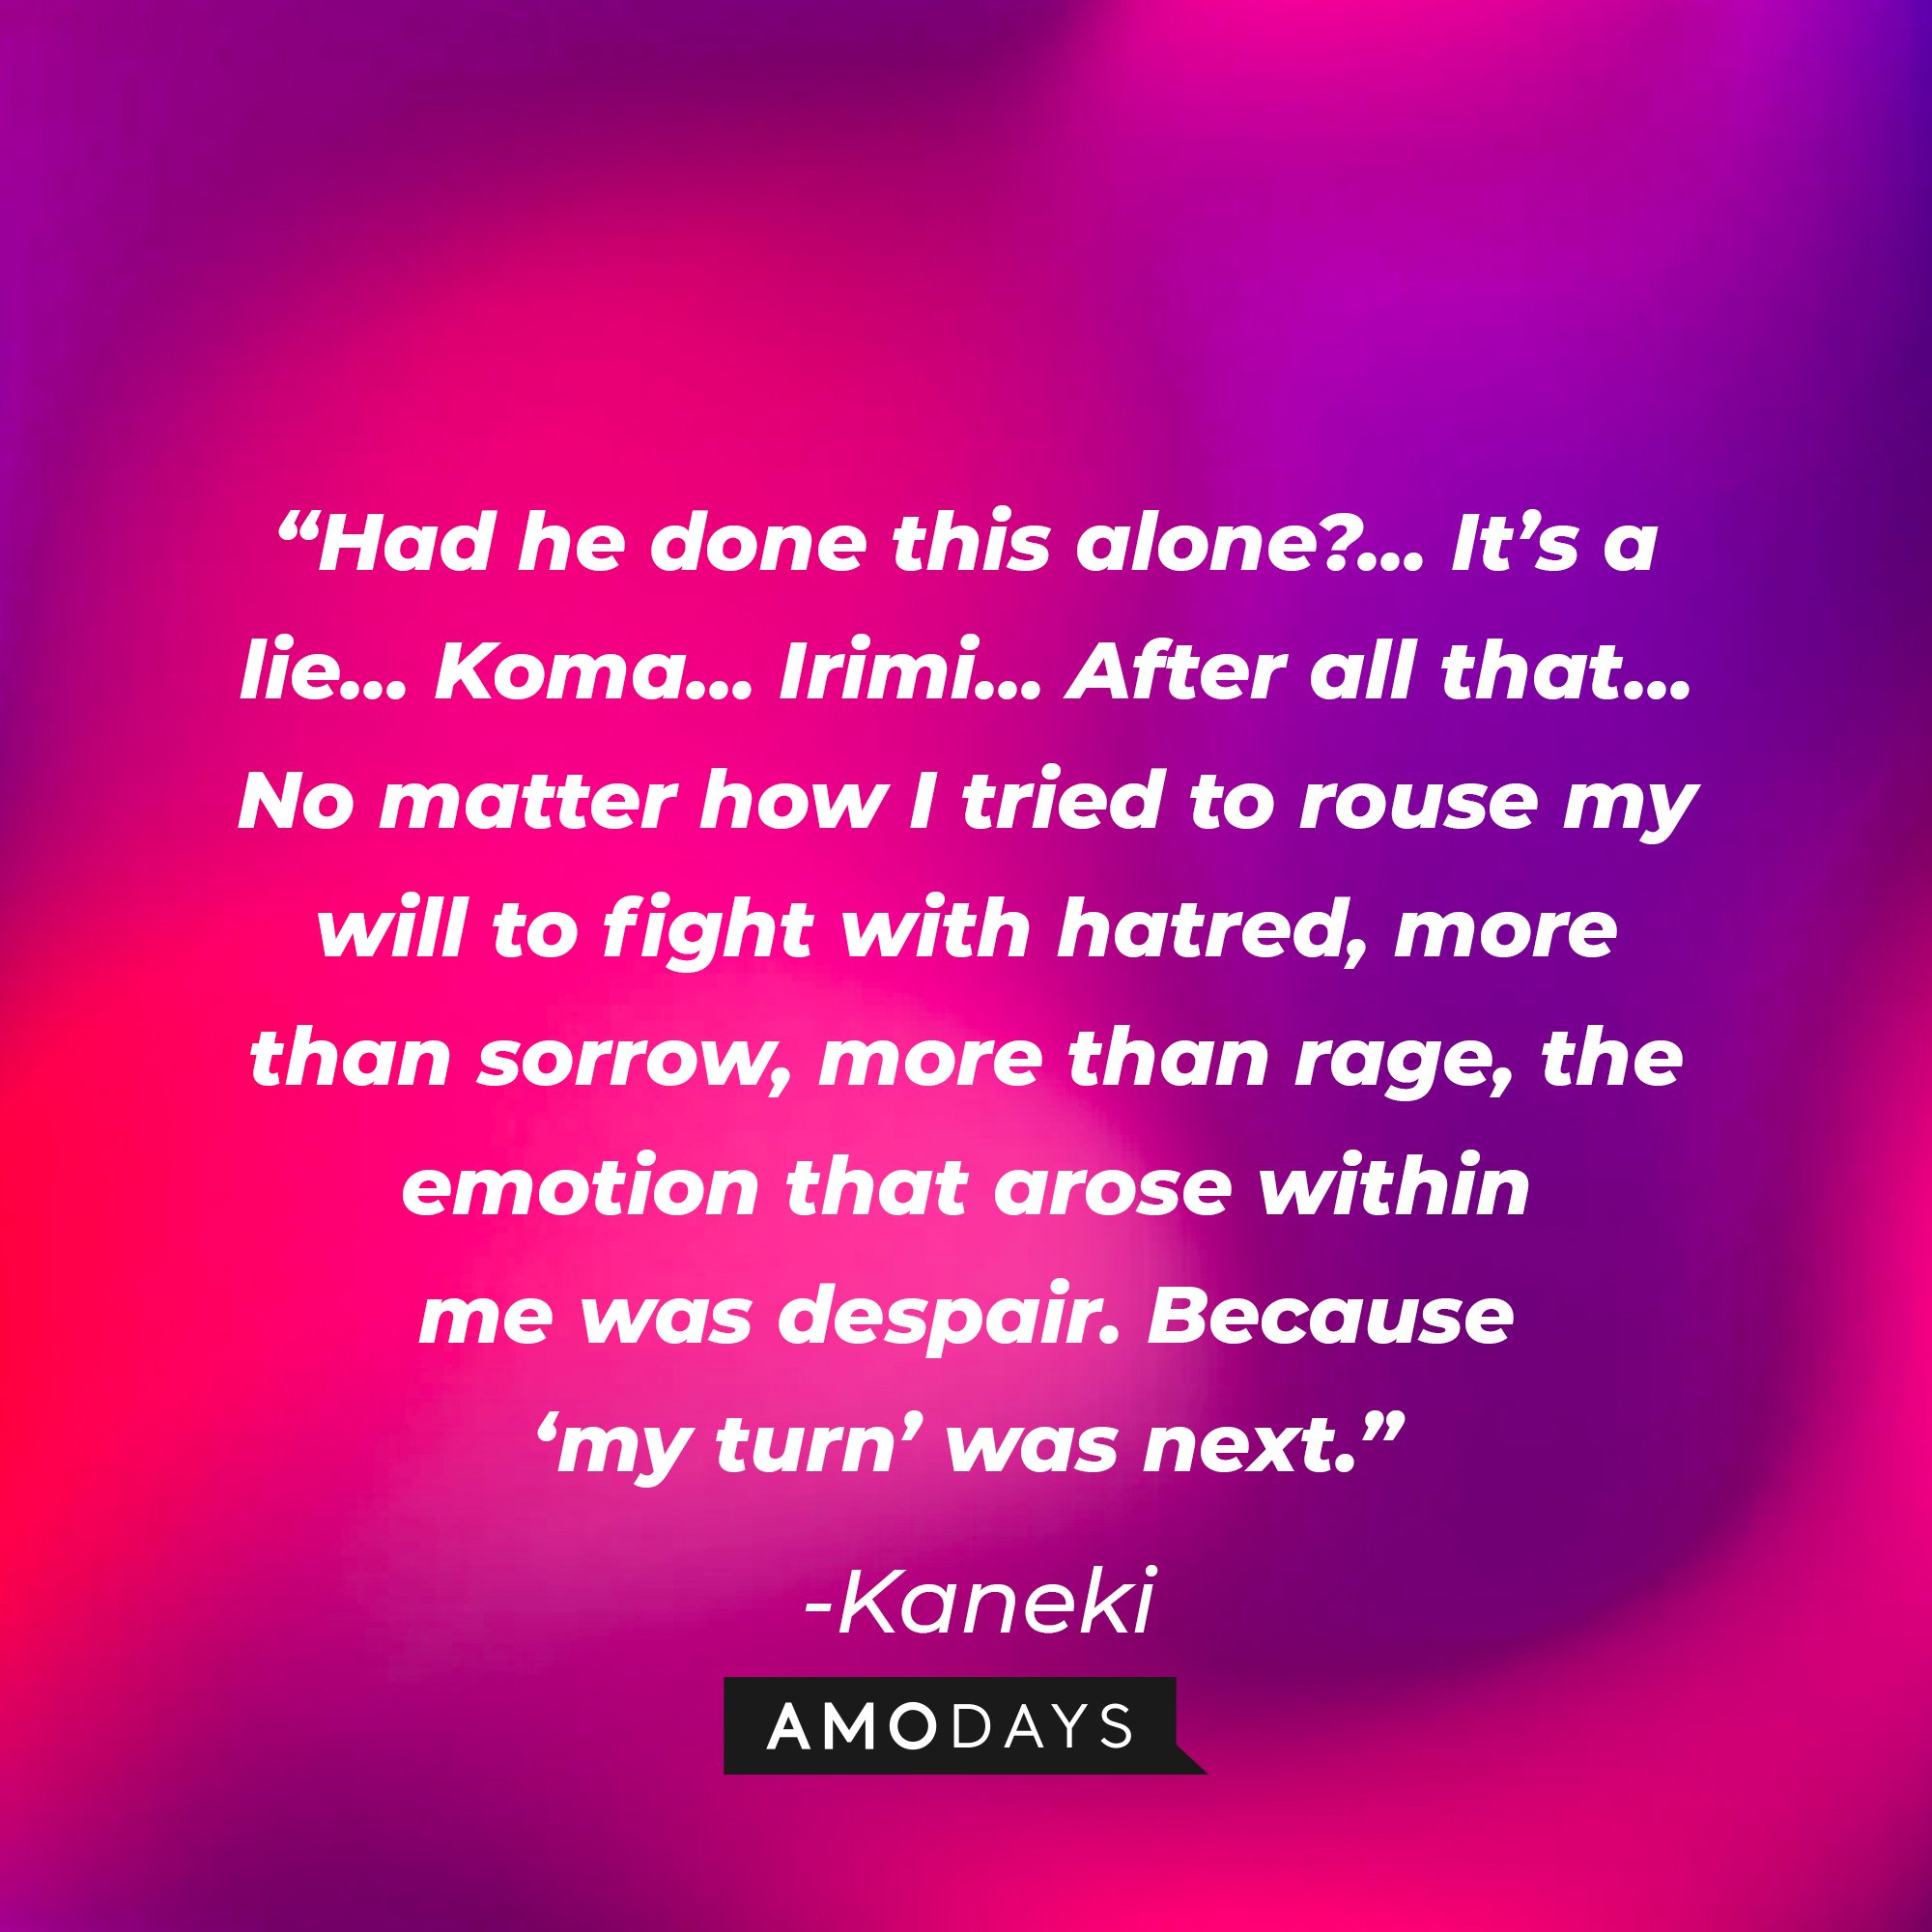 Kaneki's quote: “Had he done this alone?… It’s a lie… Koma… Irimi… After all that… No matter how I tried to rouse my will to fight with hatred, more than sorrow, more than rage, the emotion that arose within me was despair. Because ‘my turn’ was next.” | Image: AmoDays